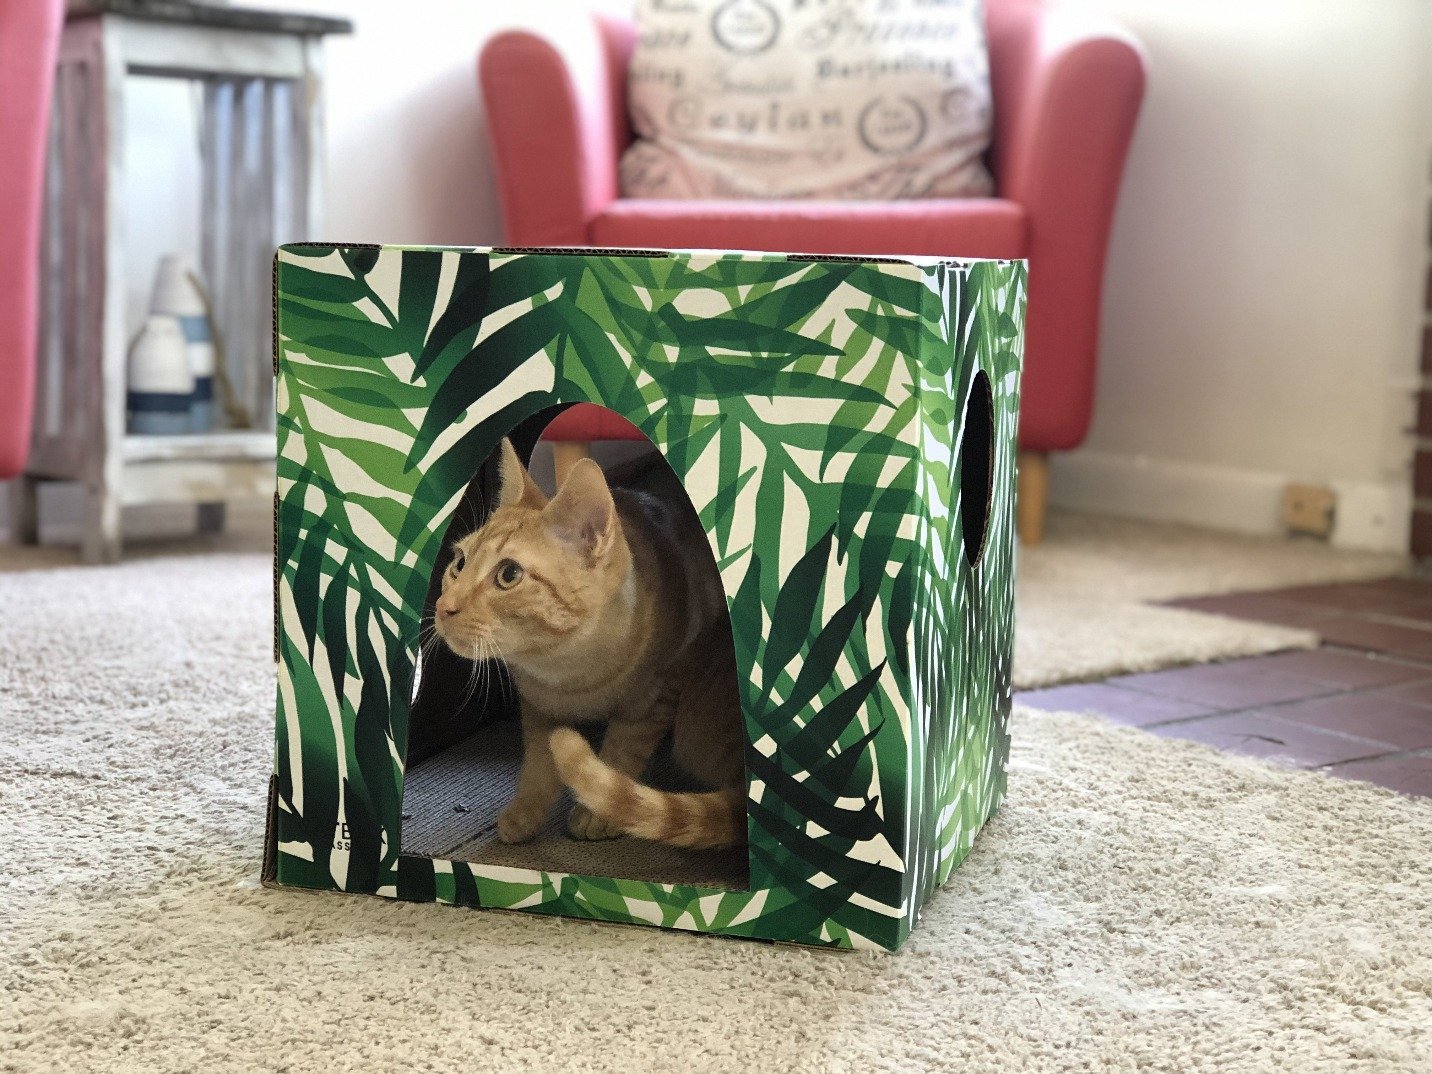 Orange tabby cat looking out from kitty jungle cardboard cat house